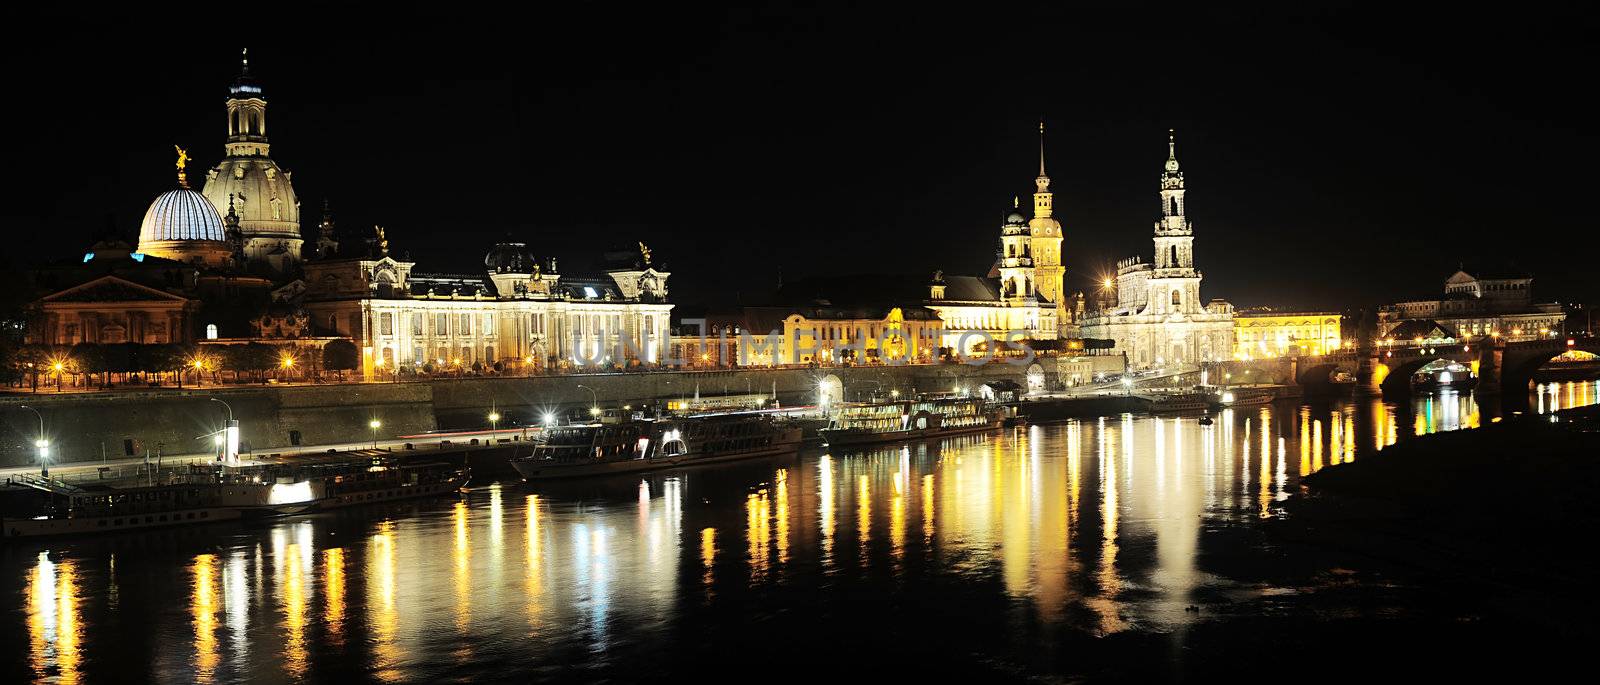 Panorama of Dresden at night. Dresden is known as the "Florence of the Elbe"  in German